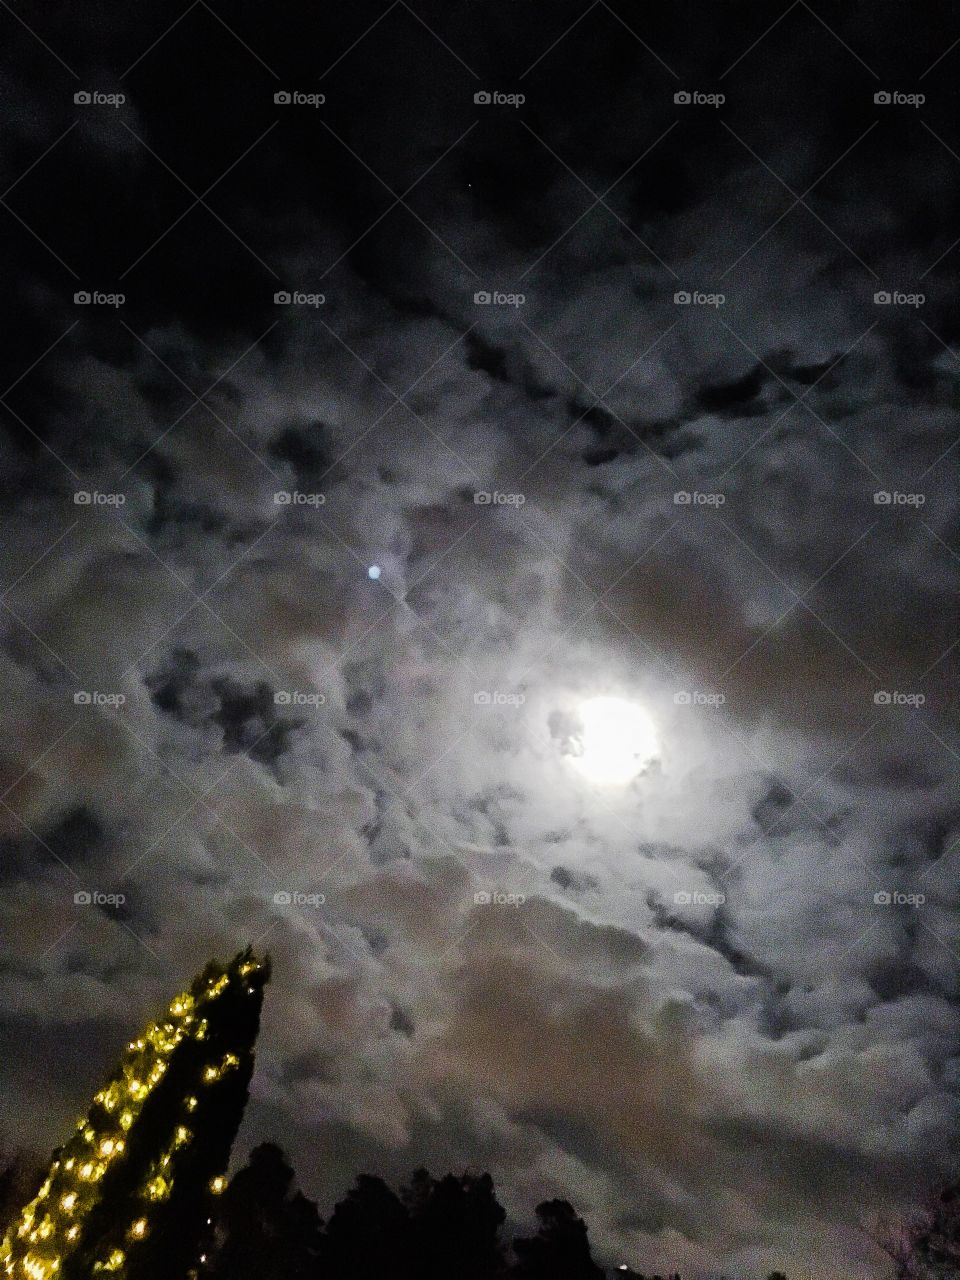 fullmoon, clouds and christmas lights